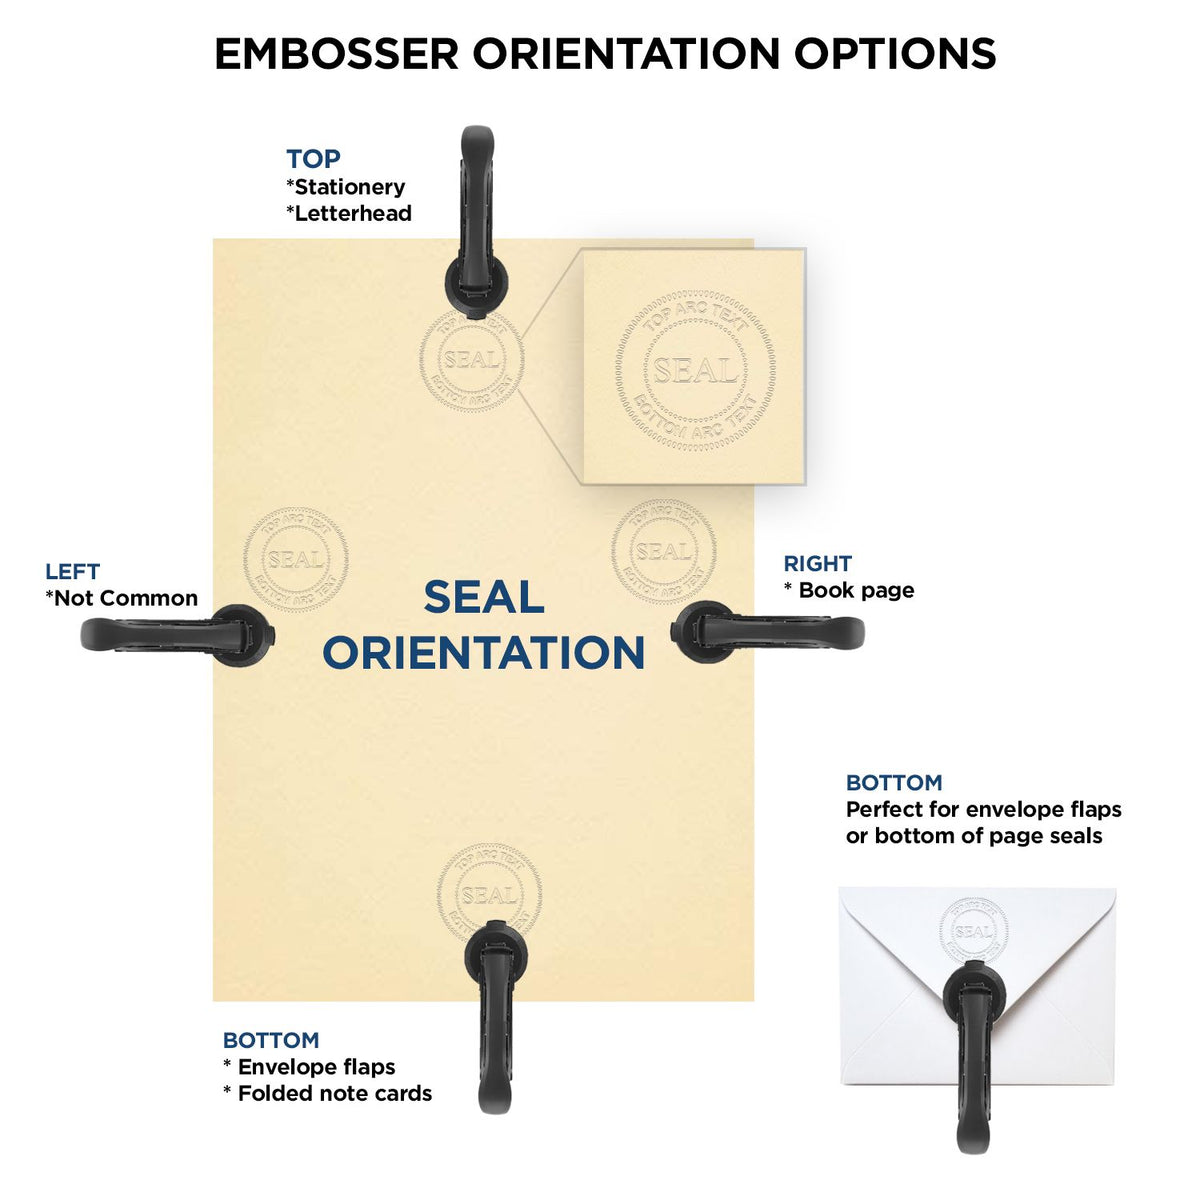 An infographic for the Soft Pocket Rhode Island Landscape Architect Embosser showing embosser orientation, this is showing examples of a top, bottom, right and left insert.